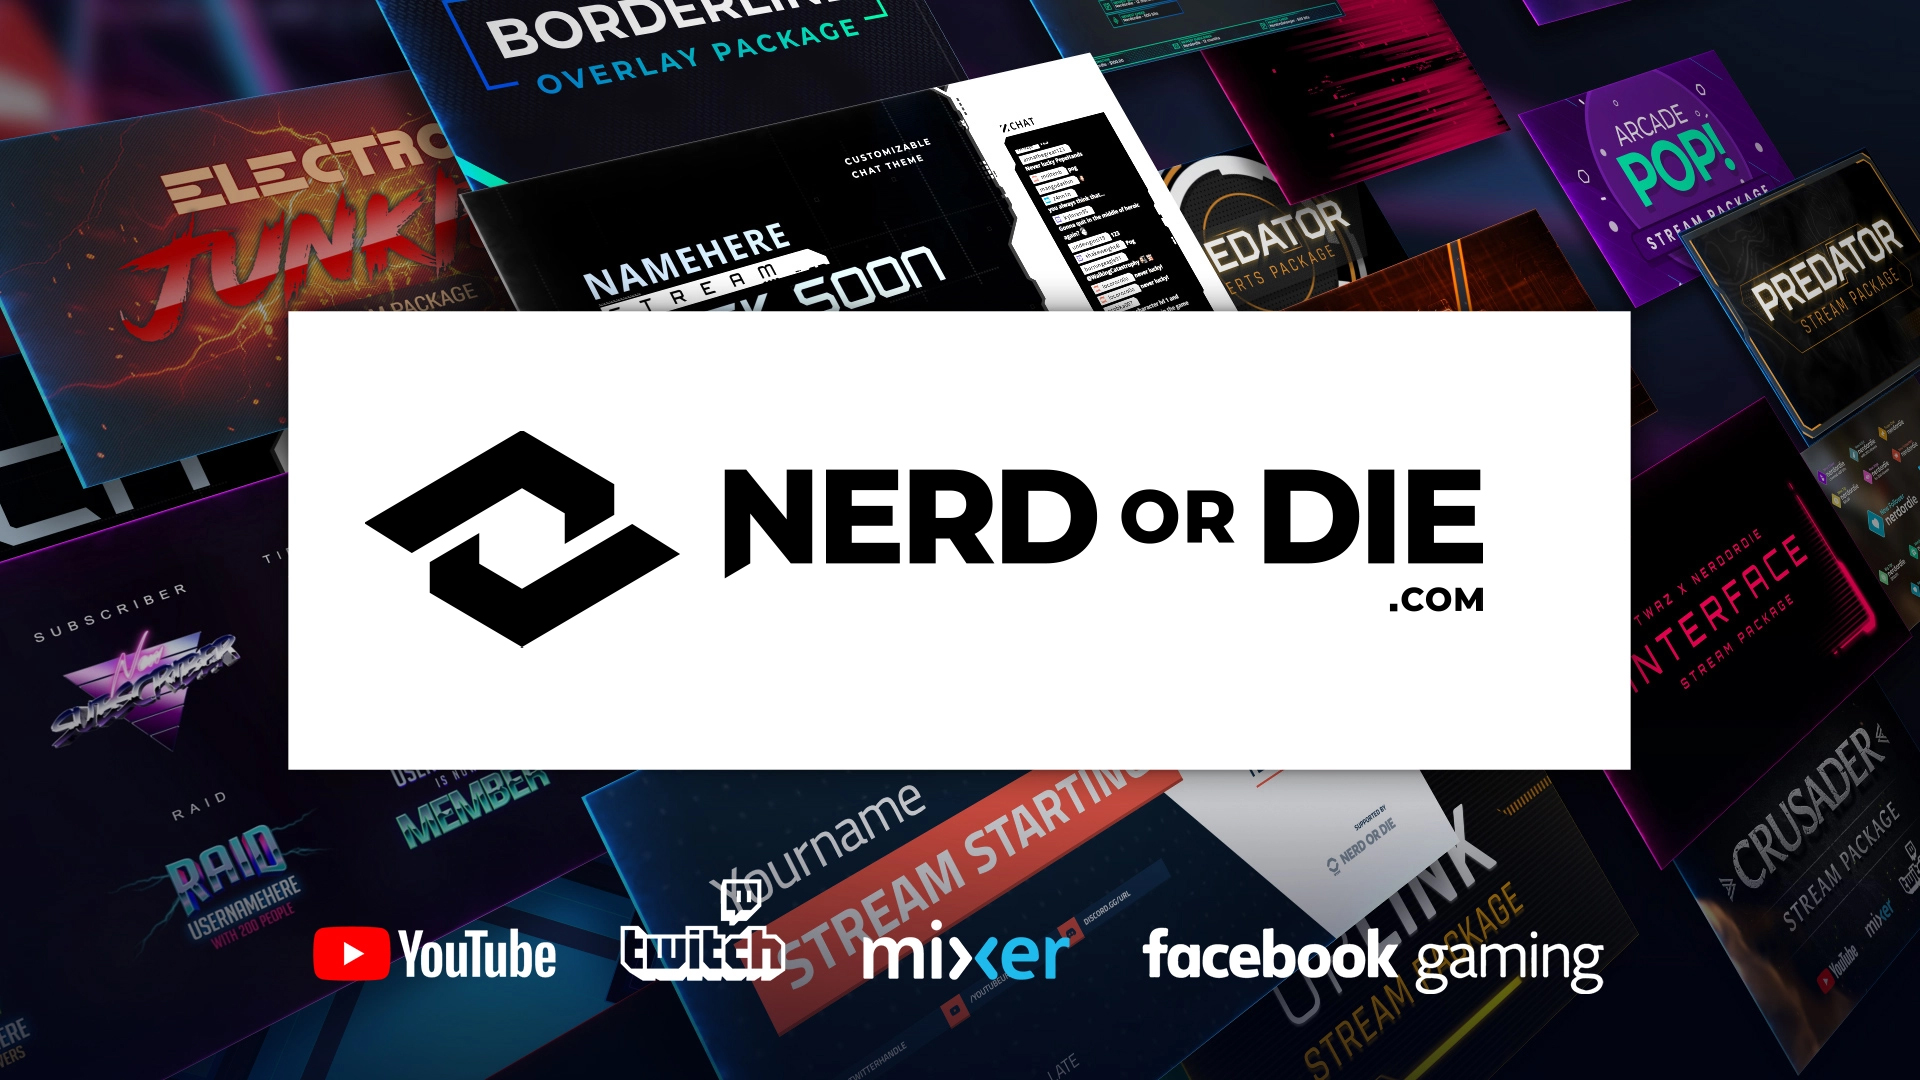 Nerd or Die creates the best overlay templates and alerts for live streamers and content creators on Twitch, Facebook, and YouTube.